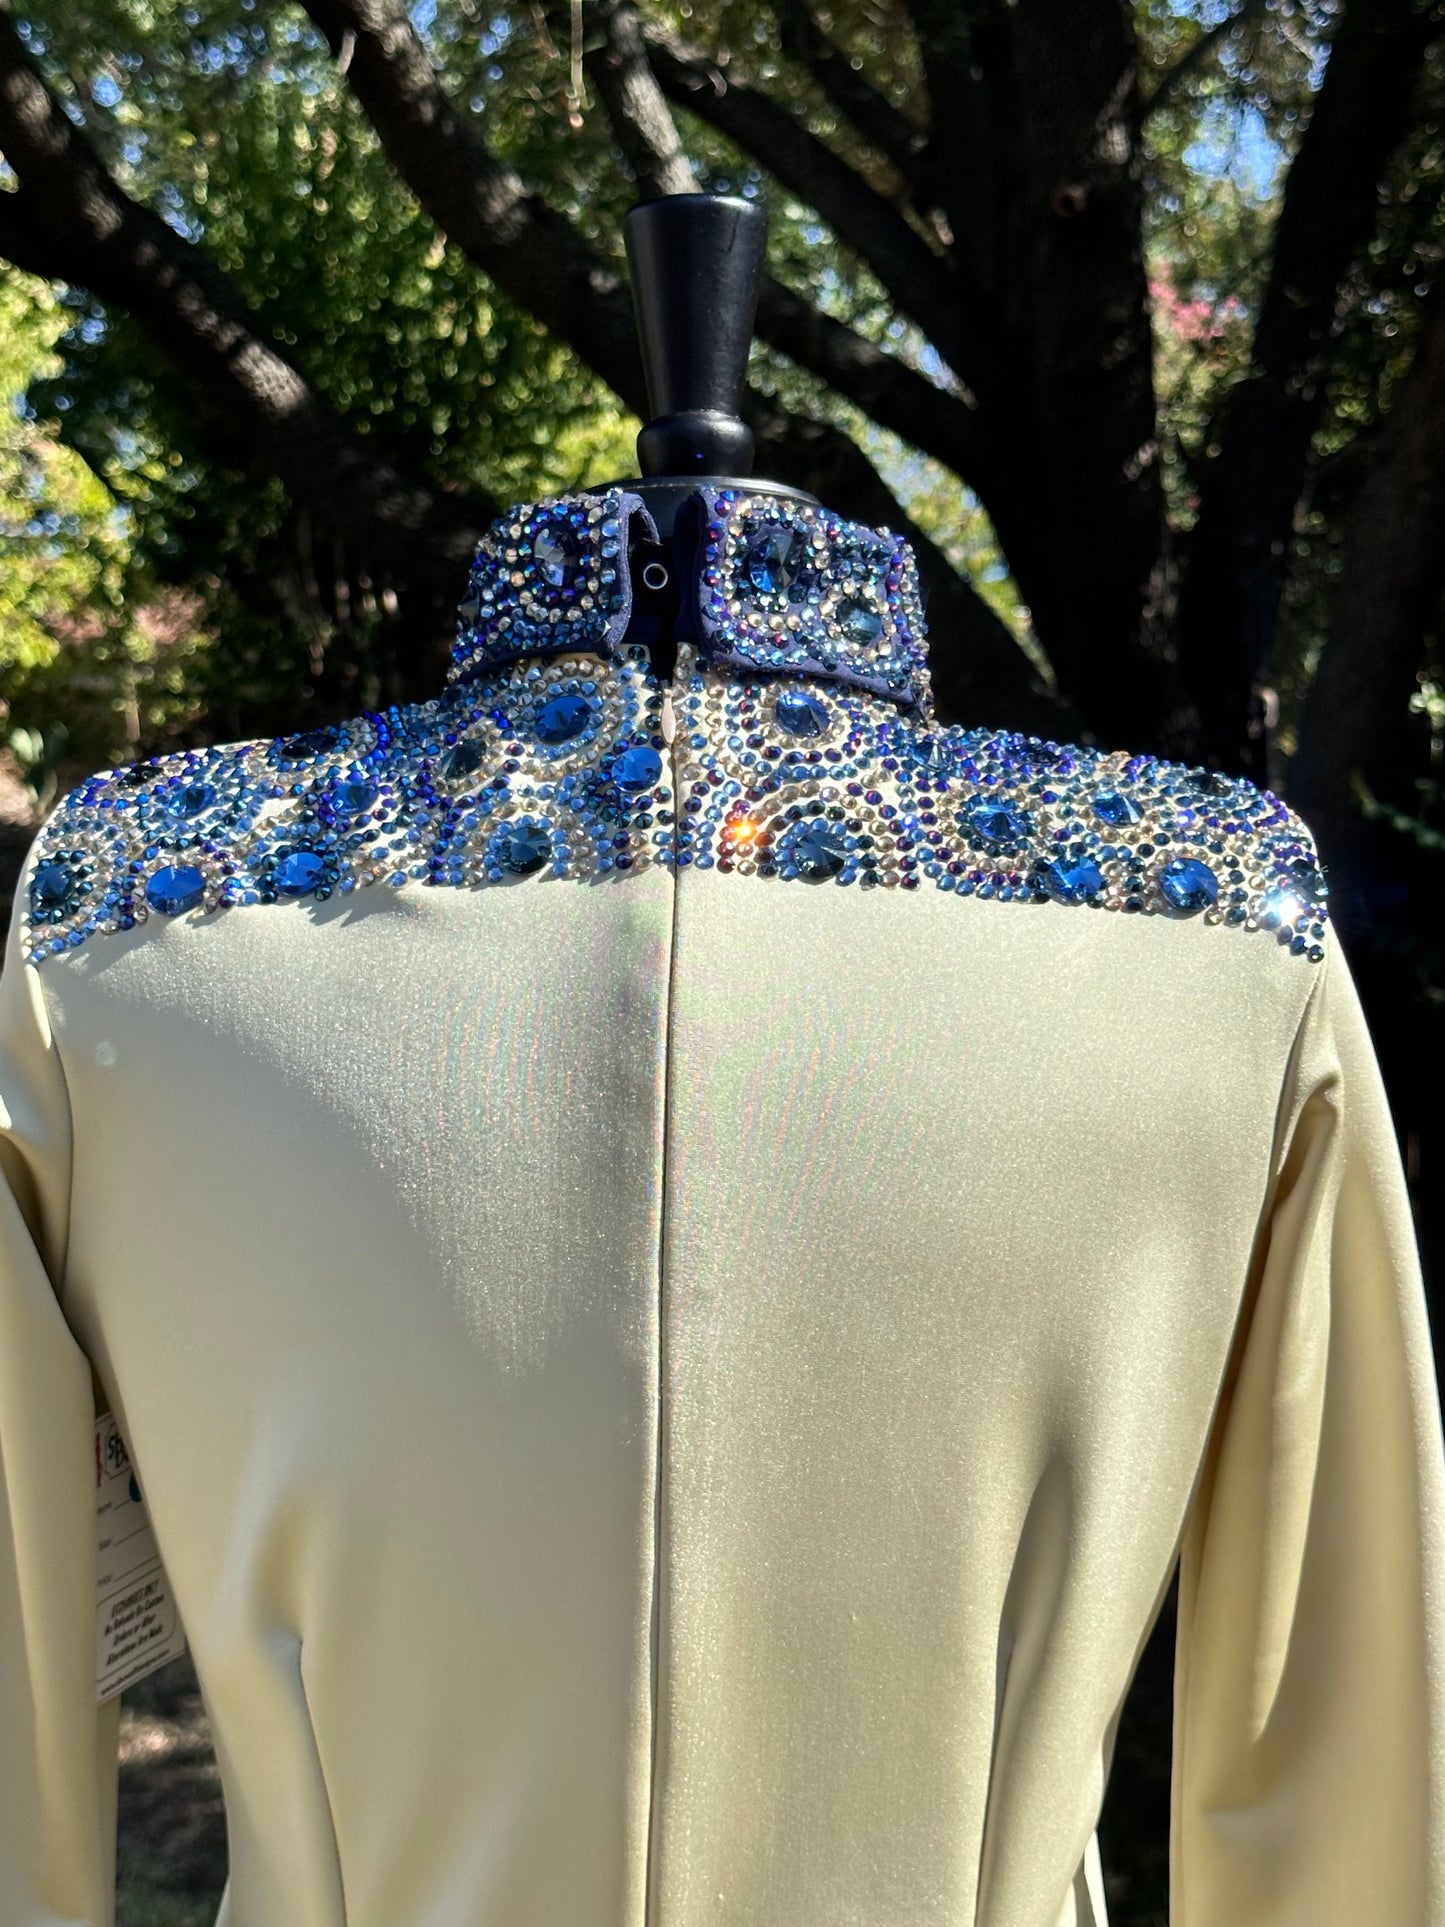 Size medium day shirt gold back zip with navy designs.